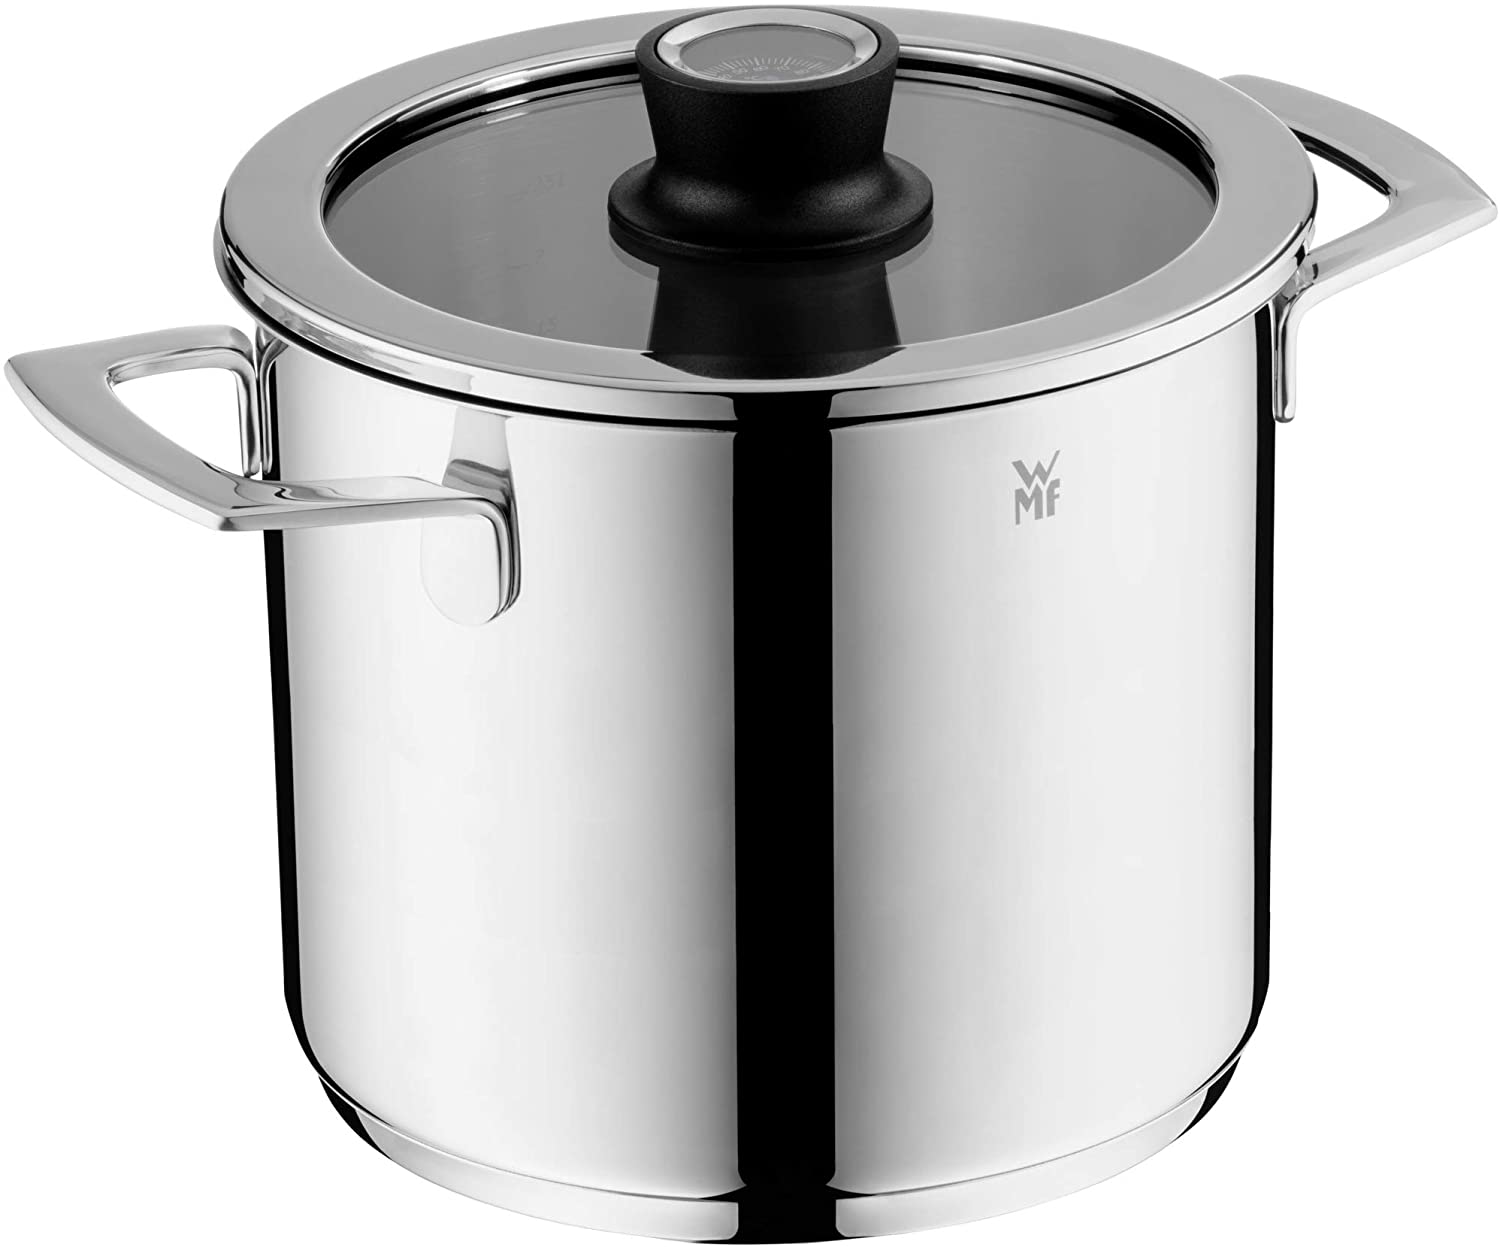 WMF 785246380 Pots, Stainless Steel